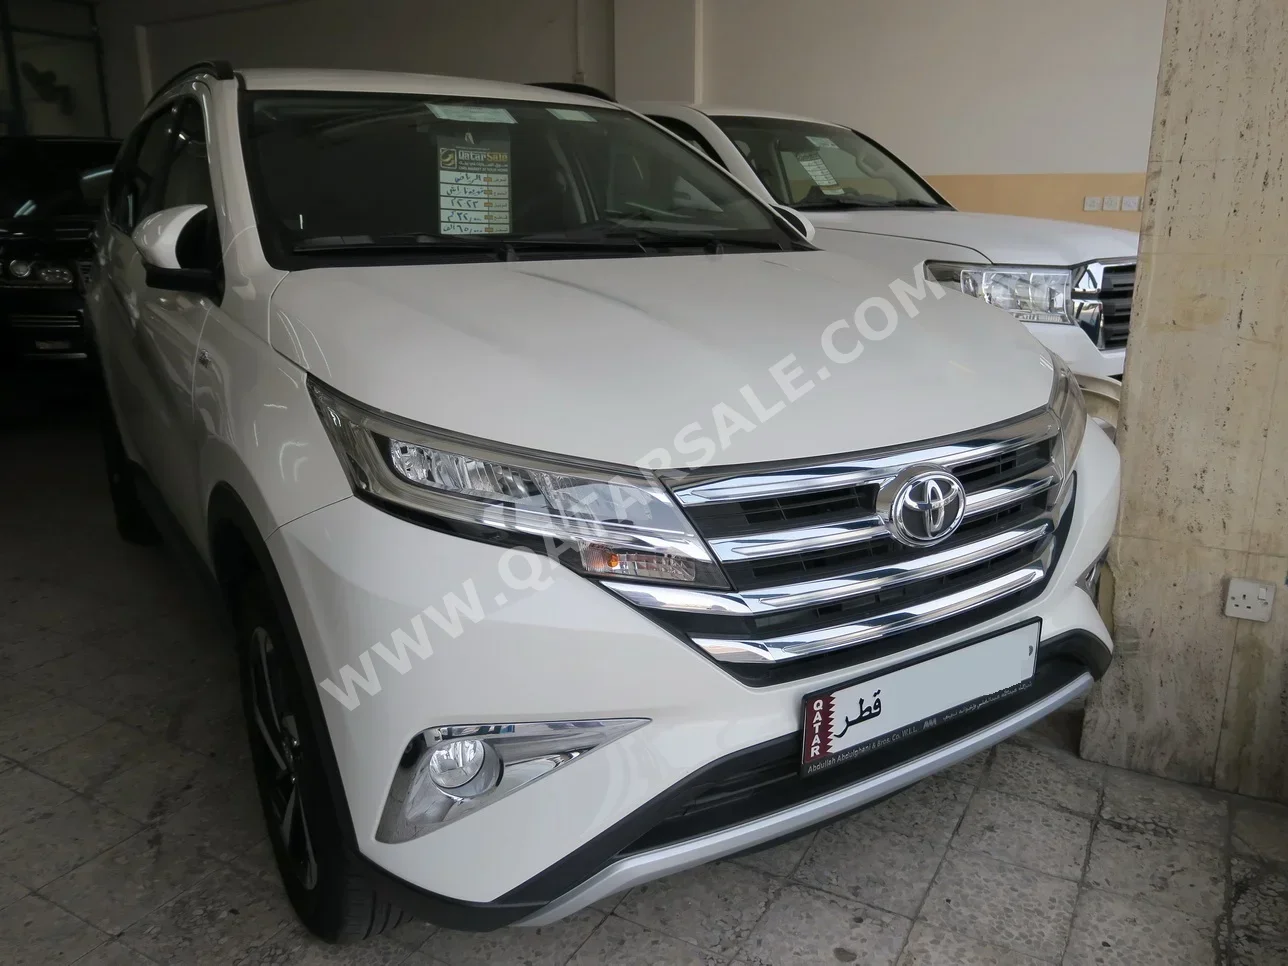 Toyota  Rush  2022  Automatic  32,000 Km  4 Cylinder  Front Wheel Drive (FWD)  SUV  White  With Warranty